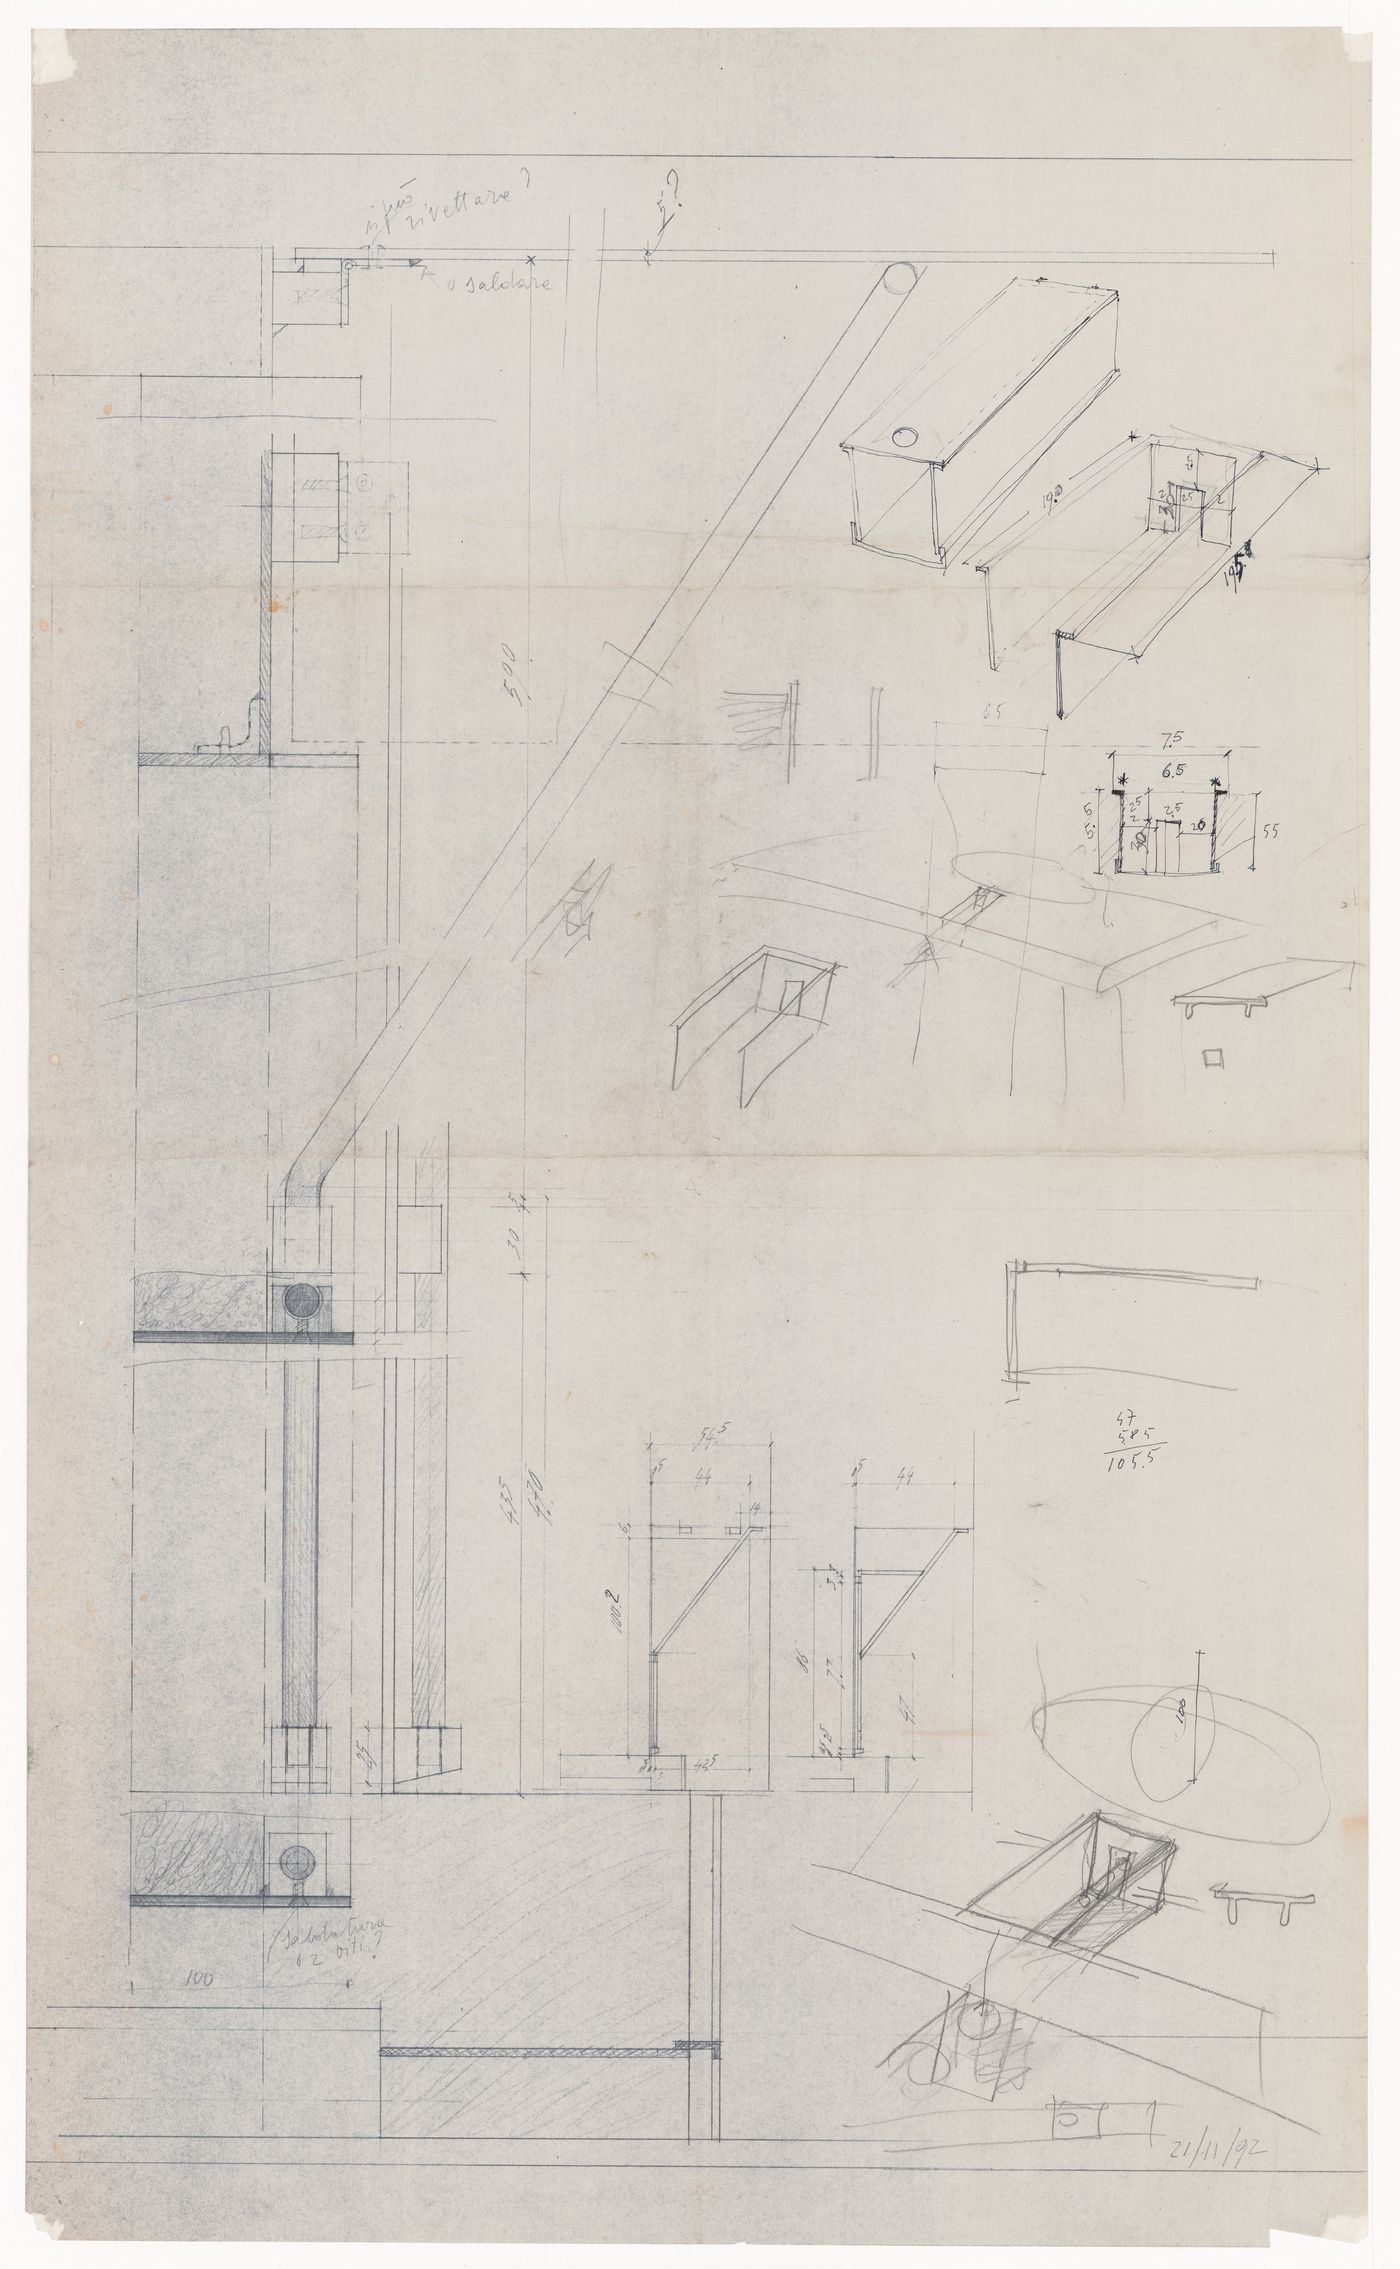 Furnishings details with sketches for Casa Riva, Ghiffa, Italy